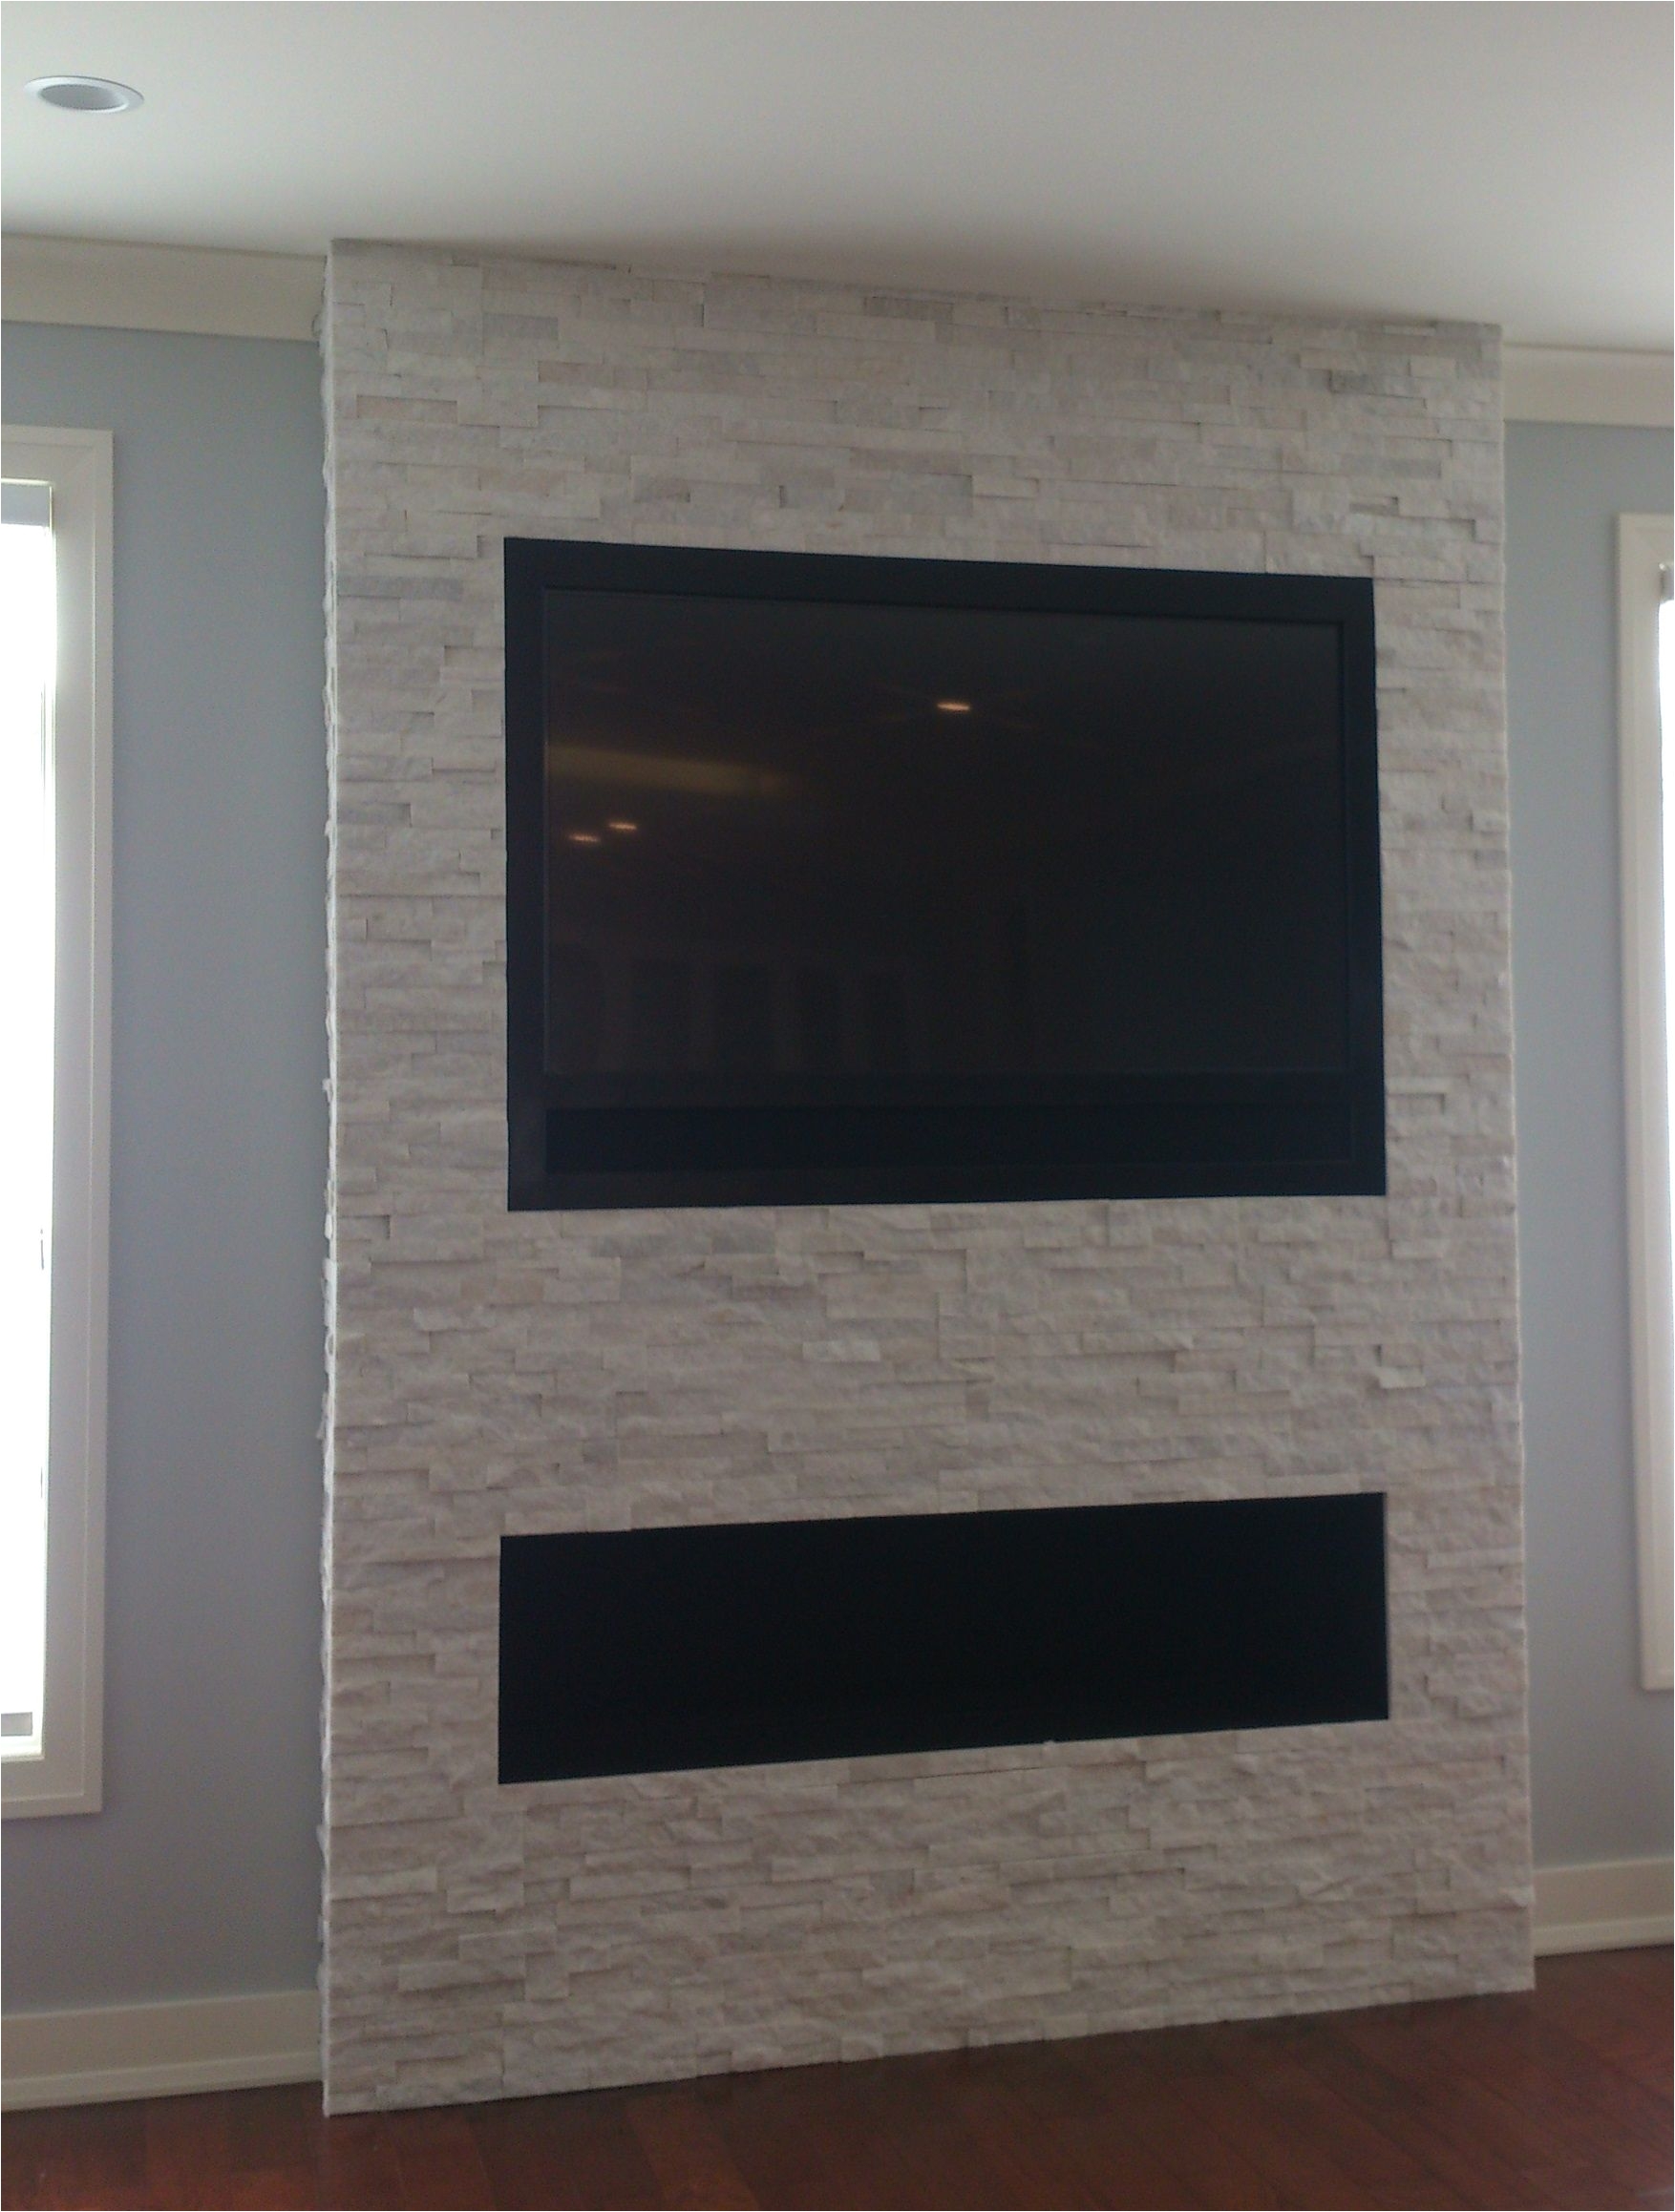 wondering how to mount a tv over a fireplace without a mantel we inset a 60 lg tv and three speakers above a fireplace on a stone wall and surrounded it